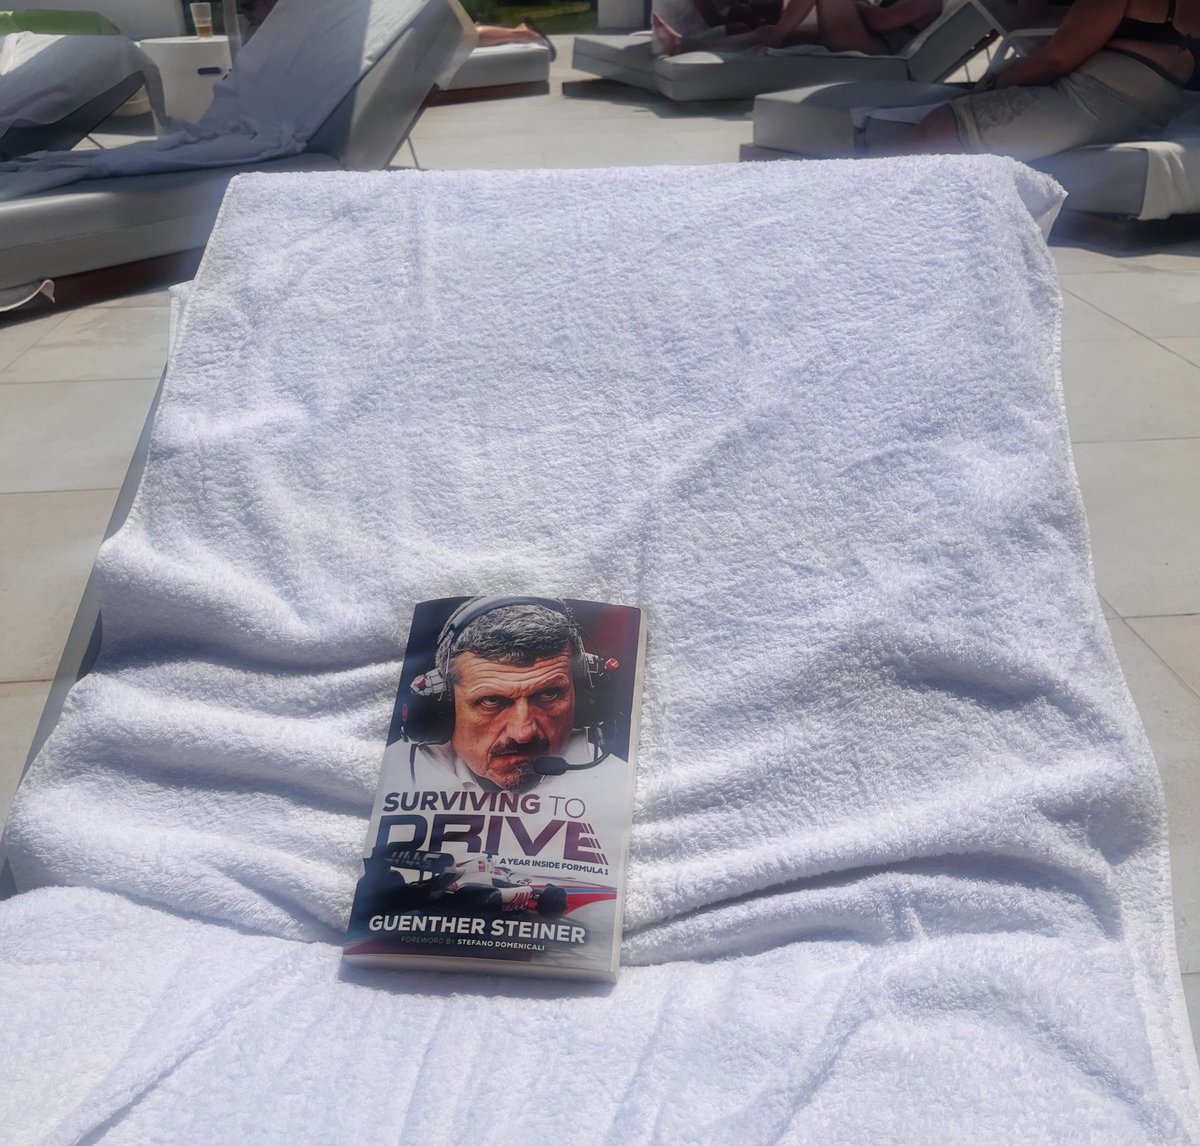 The hotel I’m at in Greece is quite strict about leaving sunbeds for too long. Tactically, I’ve left Guenther to stare into their soul about taking it so it’s fine…